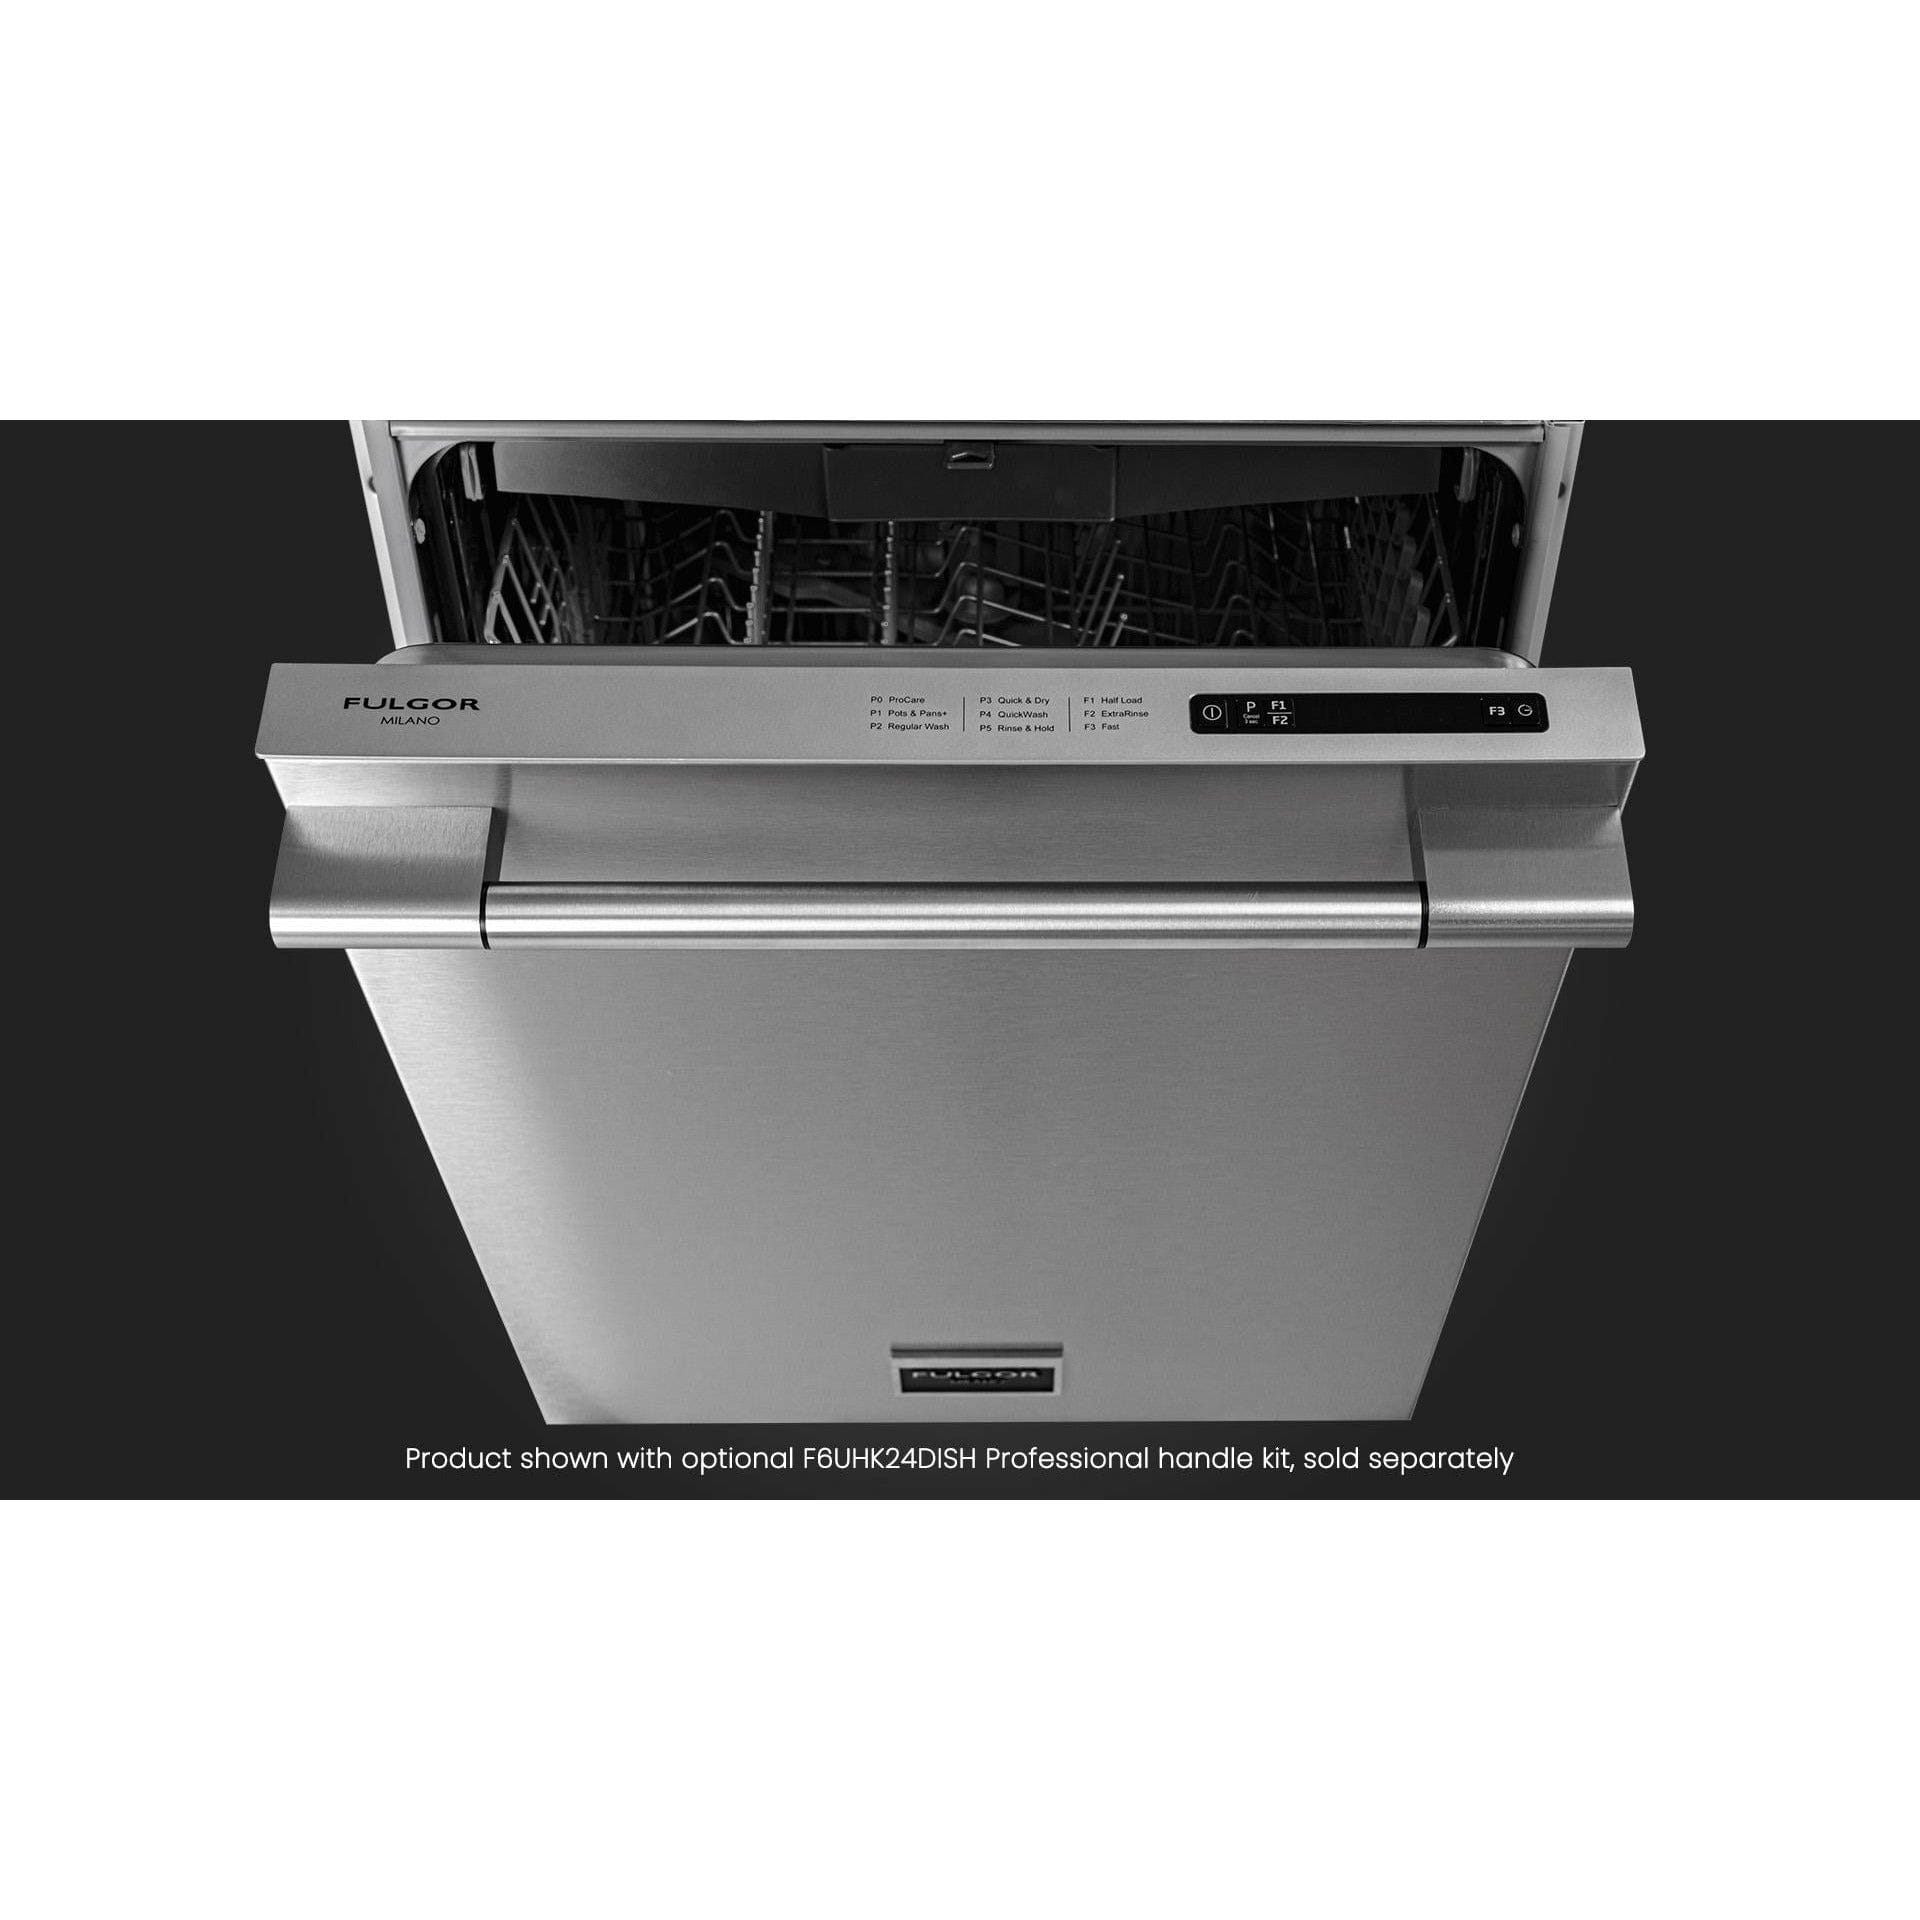 Fulgor Milano 24" Fully Integrated Built-In Dishwasher with 16 Place Settings, Stainless Steel  - F6DWT24SS2 Dishwashers F6DWT24SS2 Luxury Appliances Direct